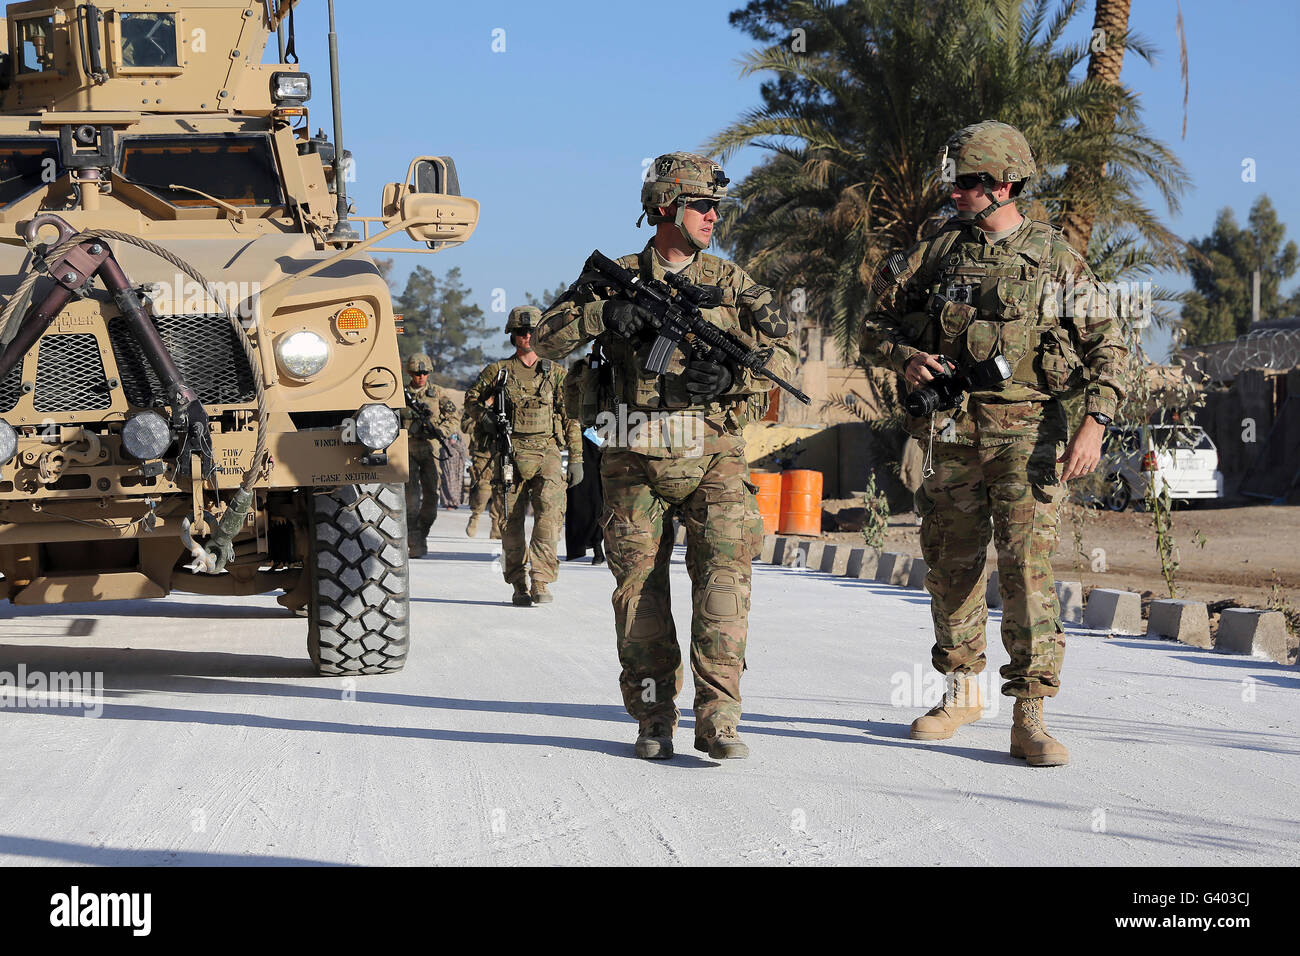 U.S. military soldiers in Farah City, Afghanistan. Stock Photo